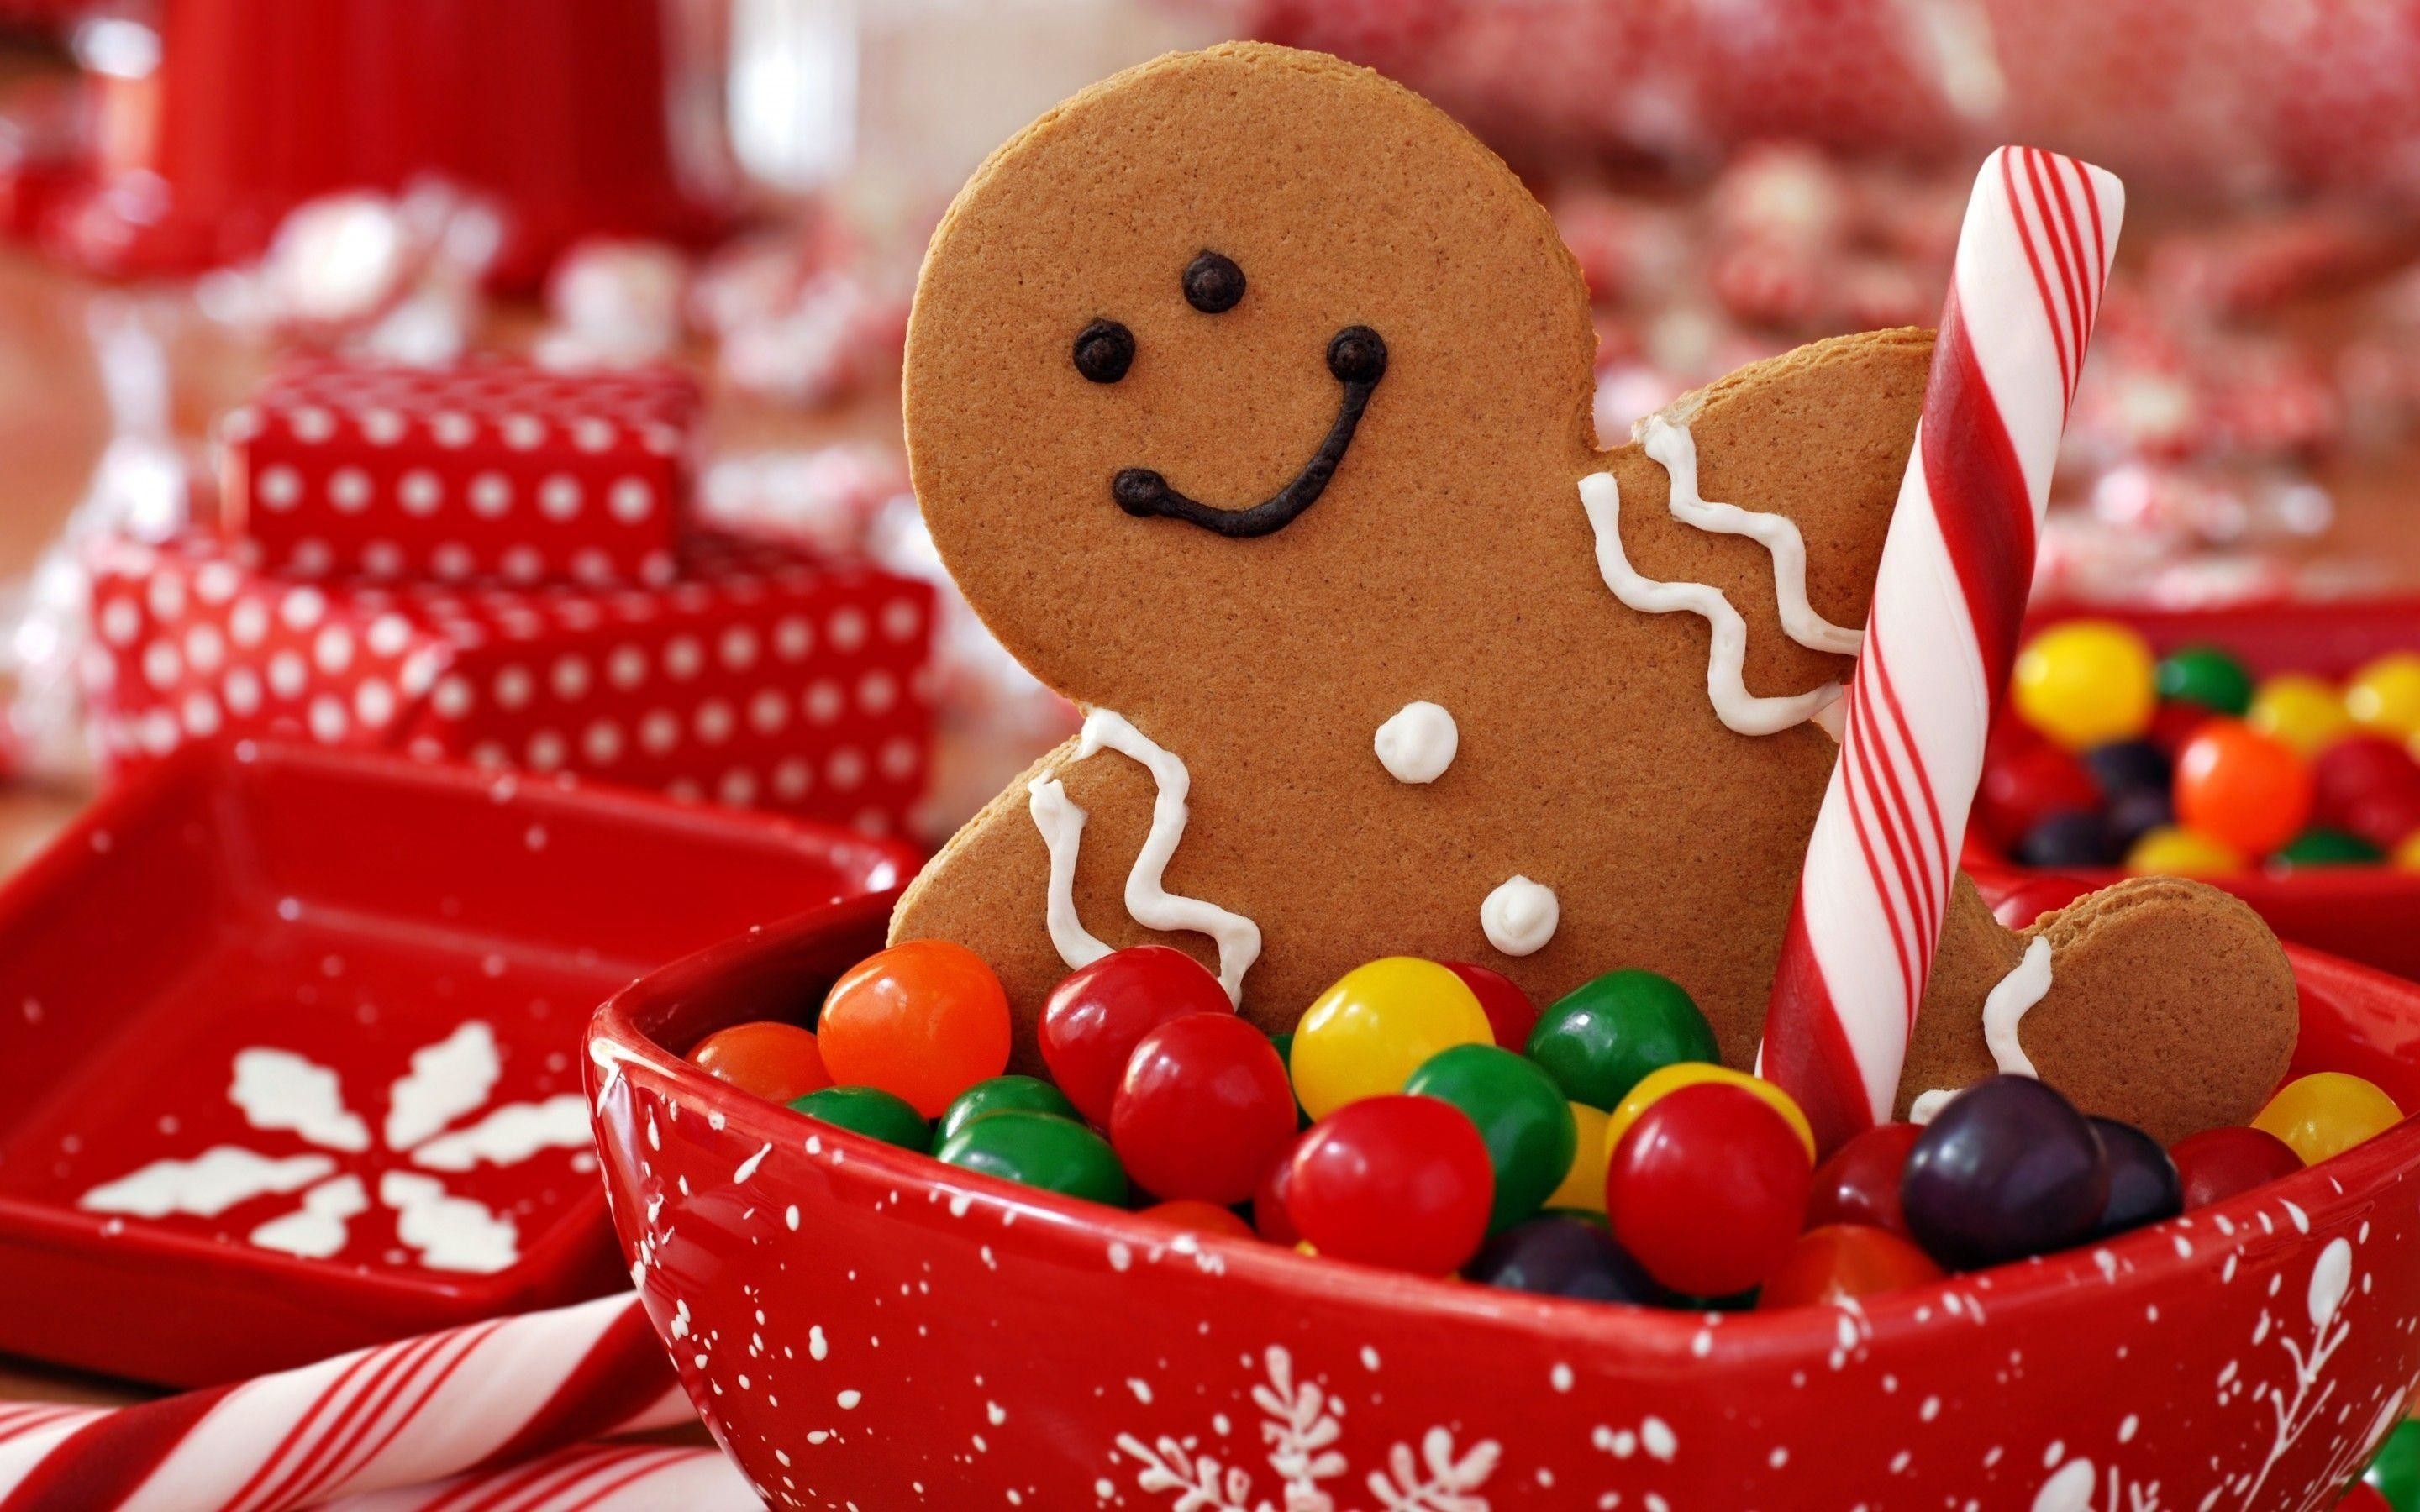 Gingerbread Man, Festive treat, Delicious holiday snack, Sweet and spicy, 2880x1800 HD Desktop